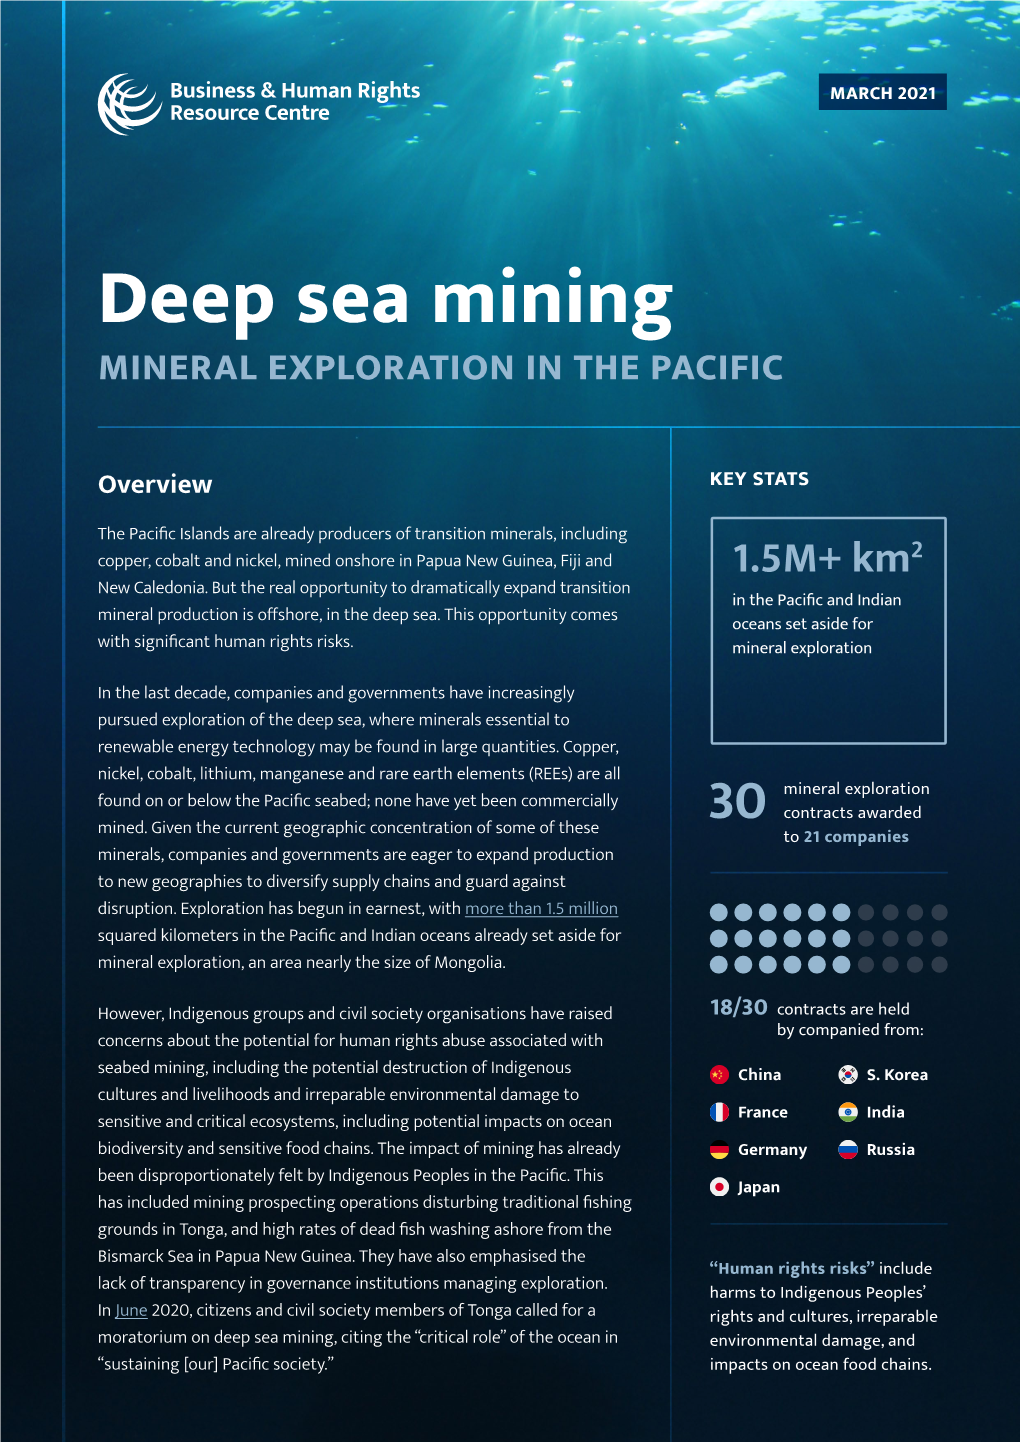 Deep Sea Mining MINERAL EXPLORATION in the PACIFIC